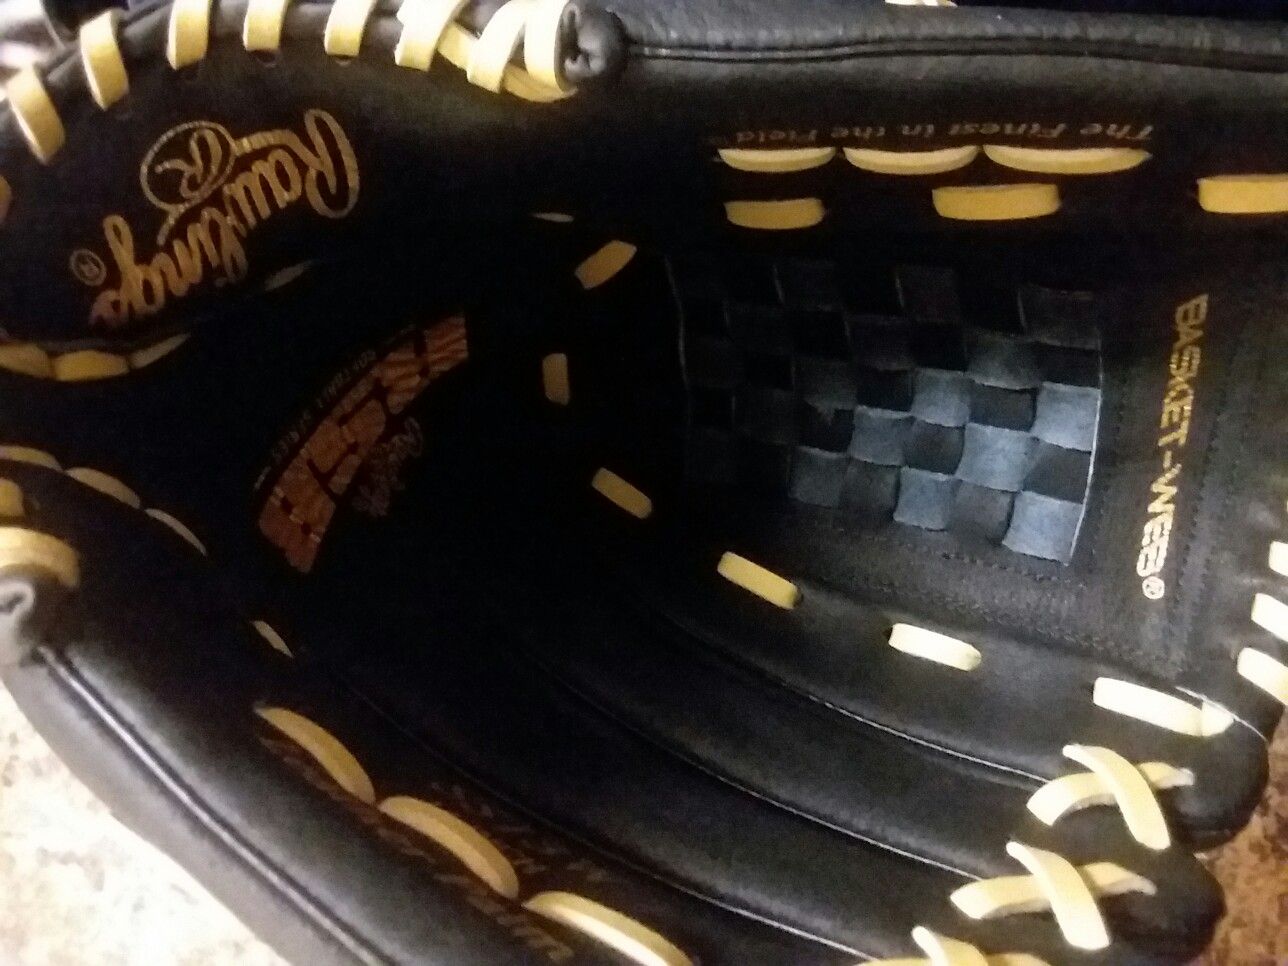 RAWLING SOFTBALL 13IN LEATHER PALM